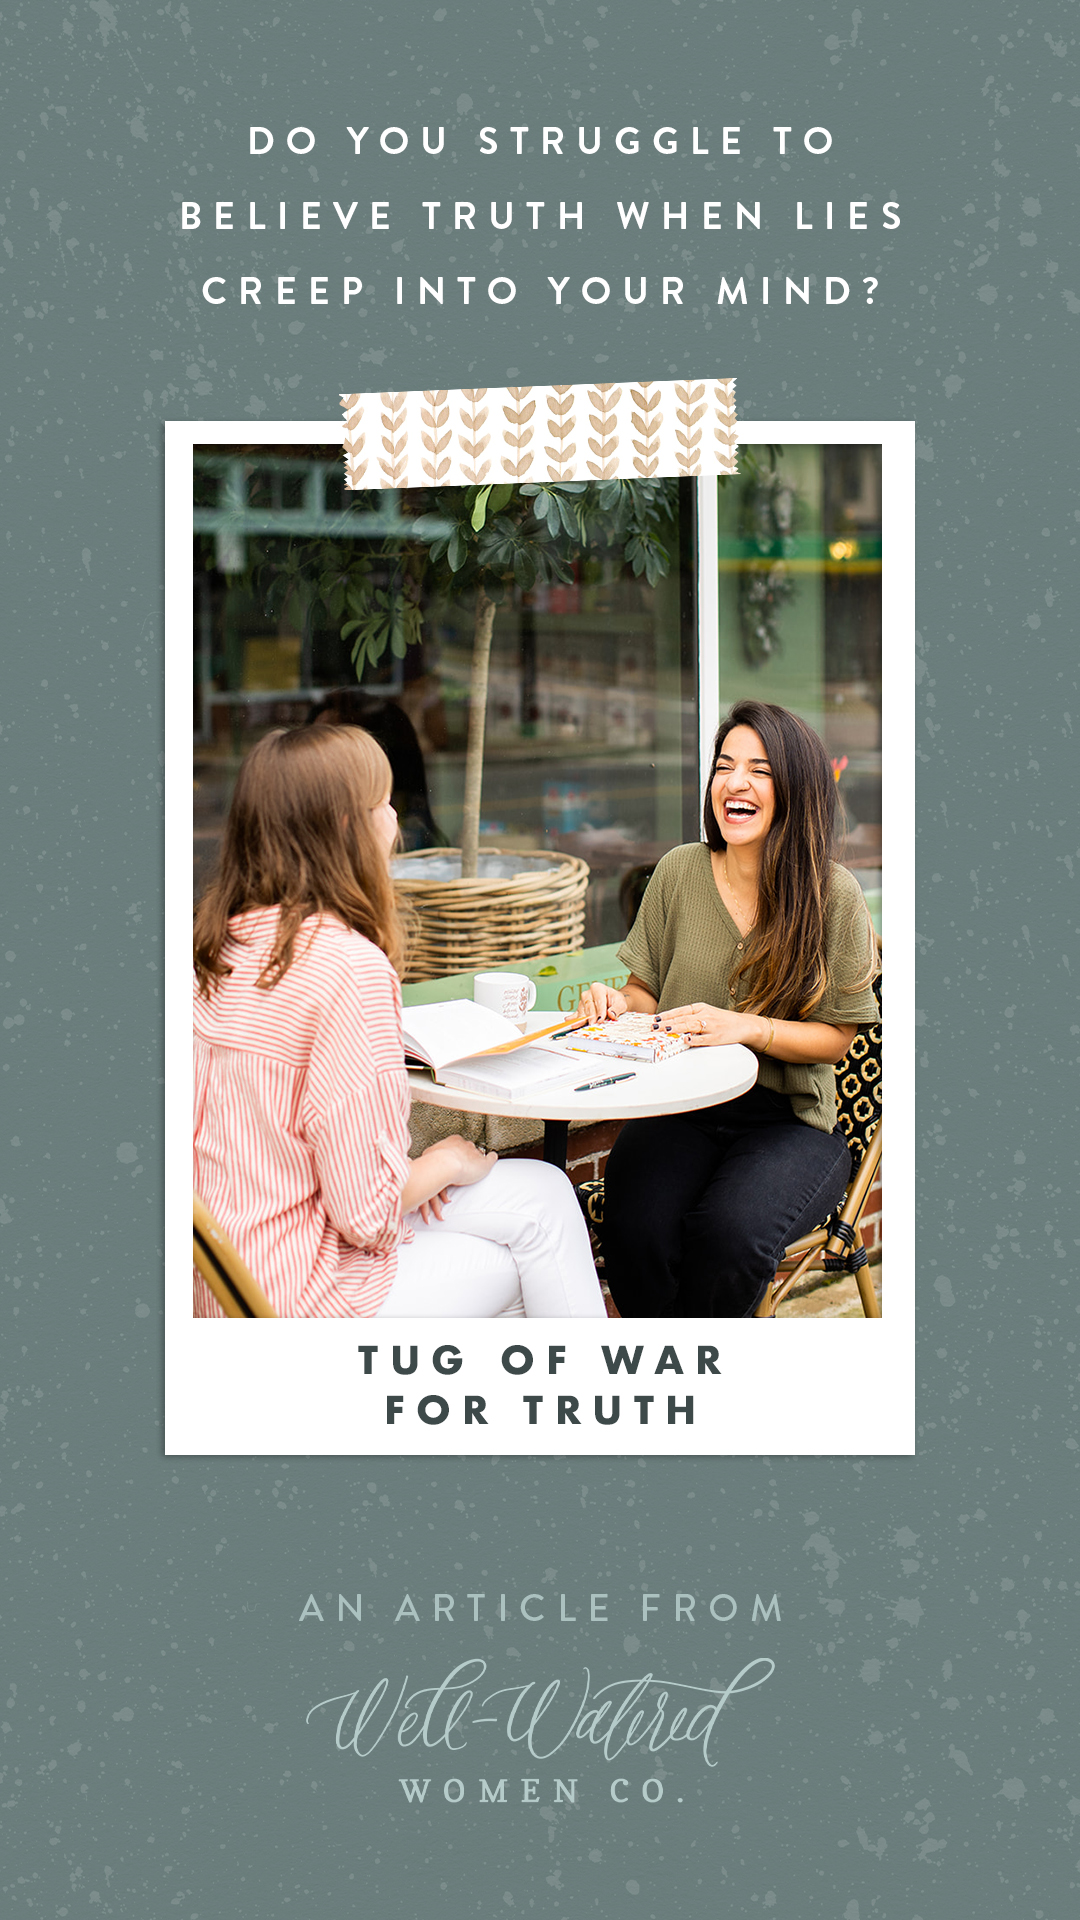 Tug of War for Truth - An Article by Well-Watered Women